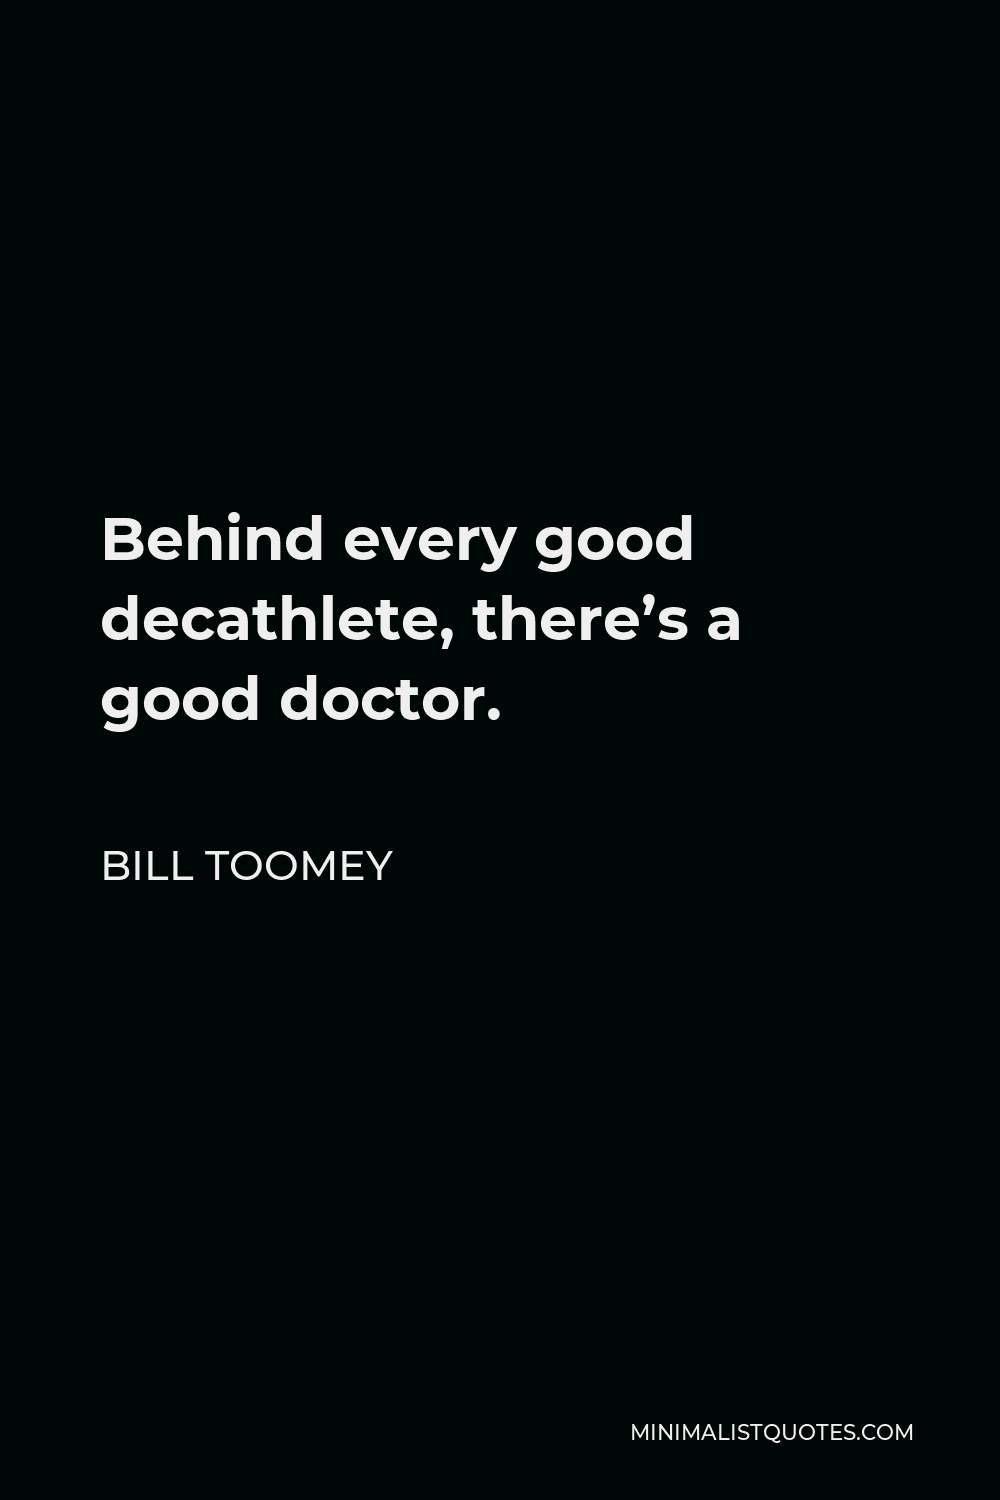 Bill Toomey Quote - Behind every good decathlete, there’s a good doctor.